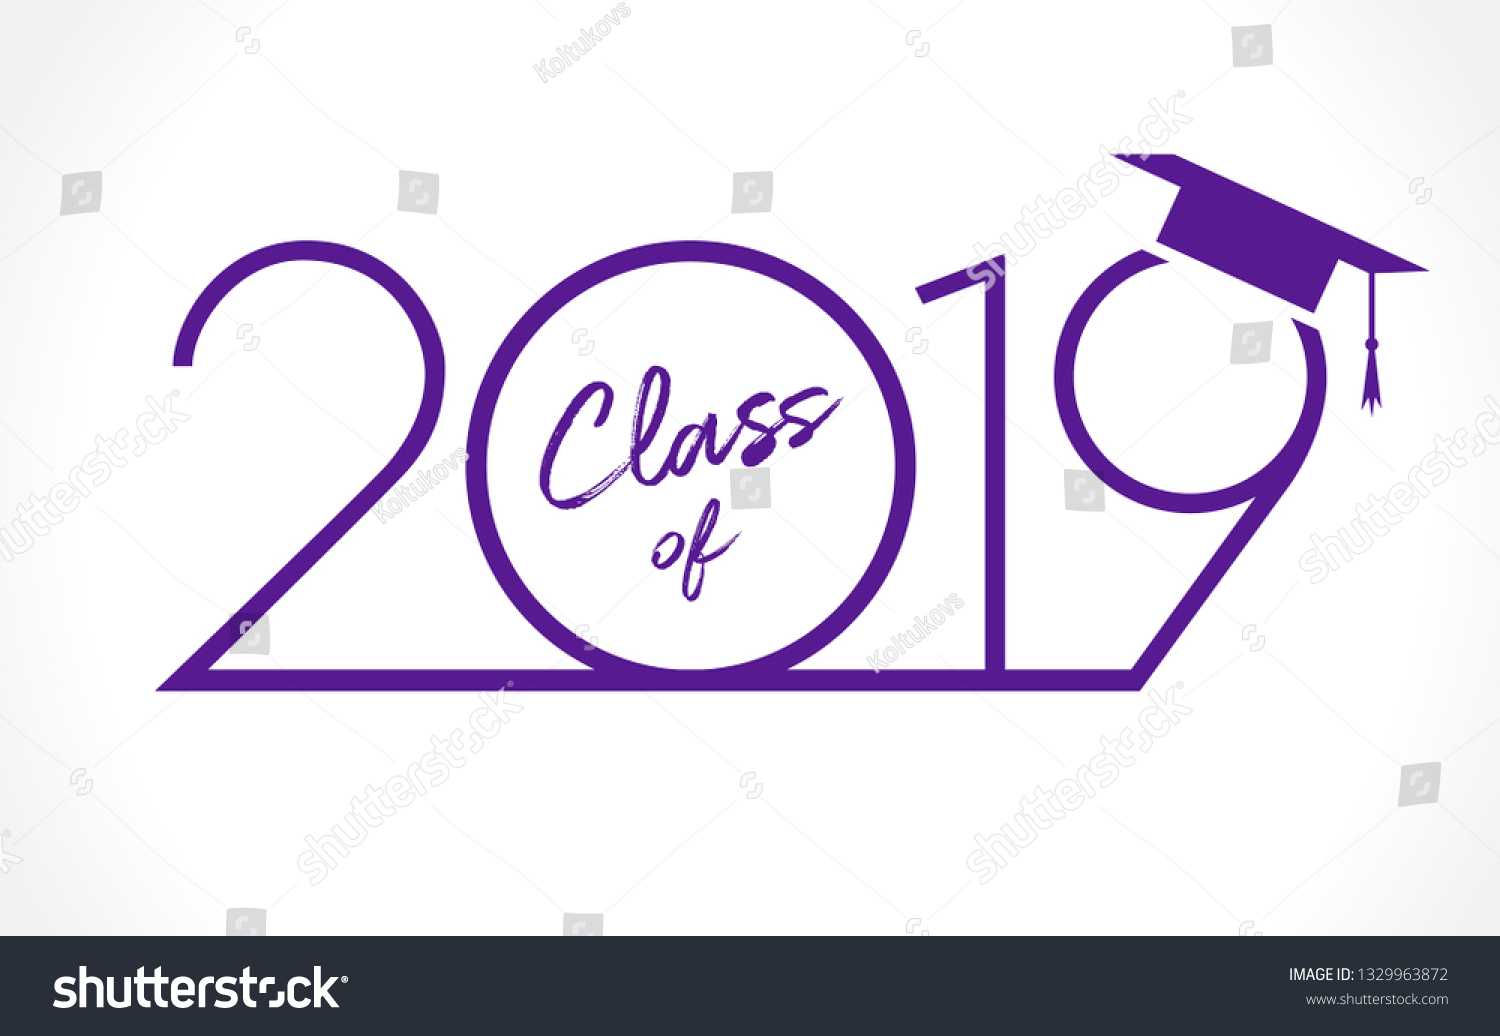 Class 20 19 Year Graduation Banner Stock Vector (Royalty Within Graduation Banner Template